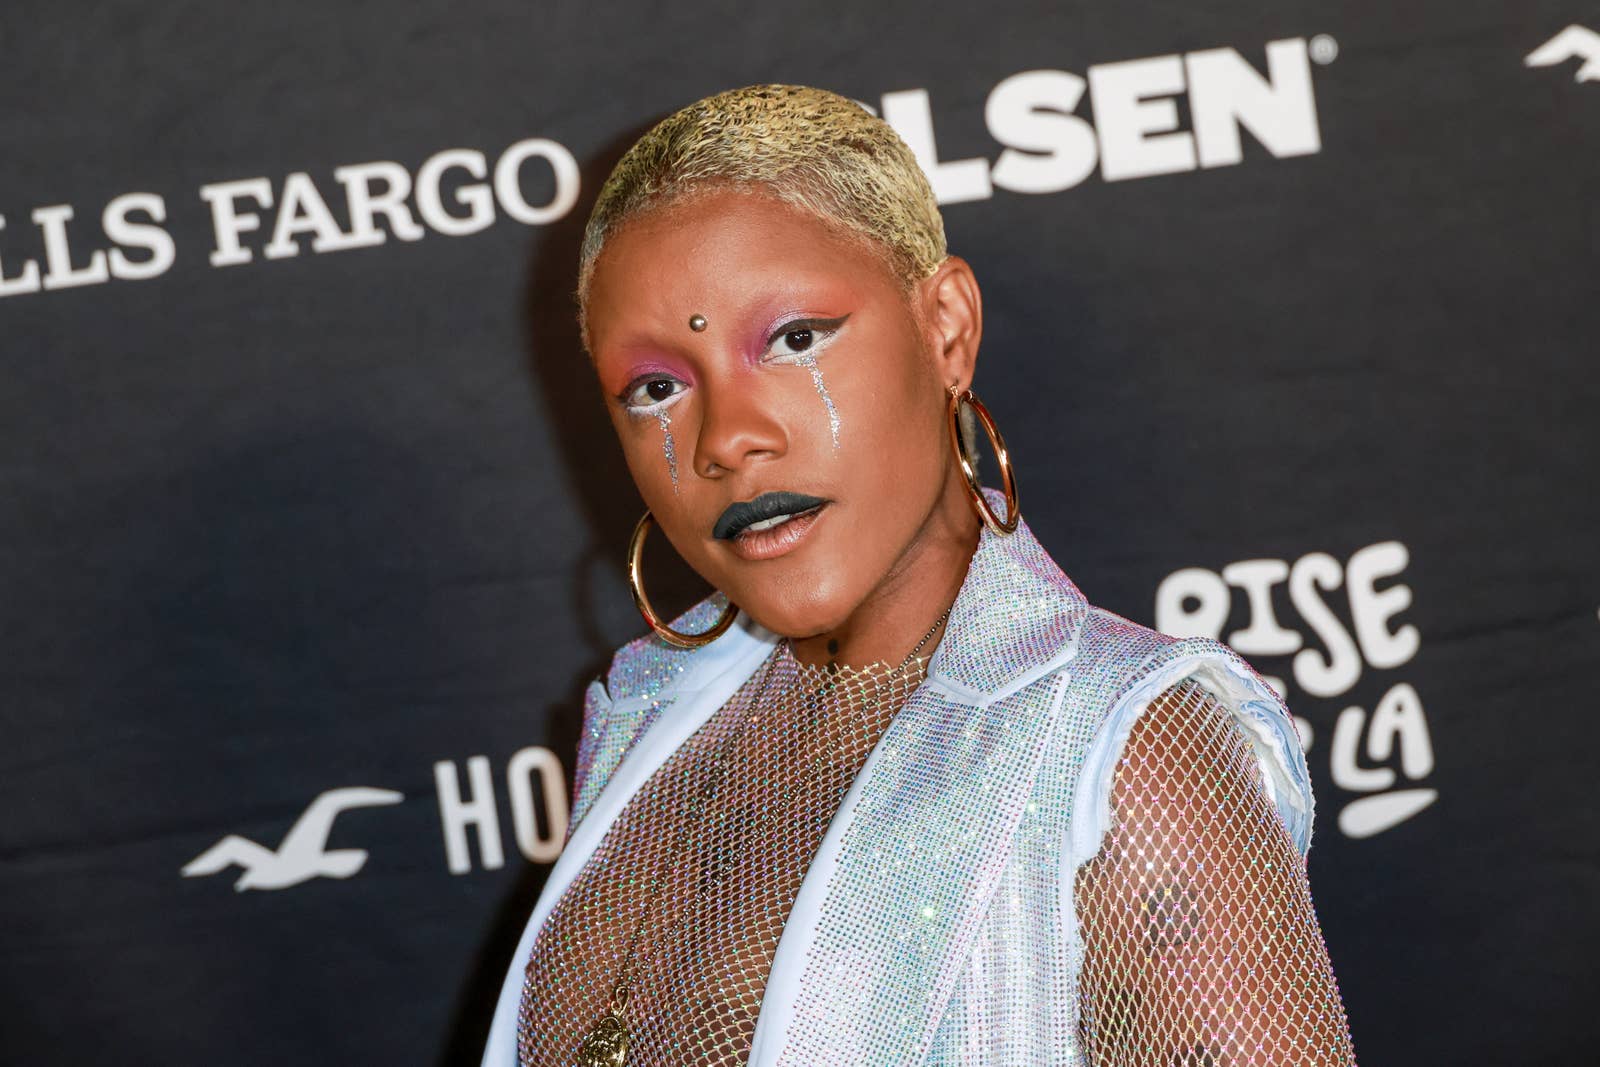 INIKO in a sequined outfit and bold makeup poses at an event